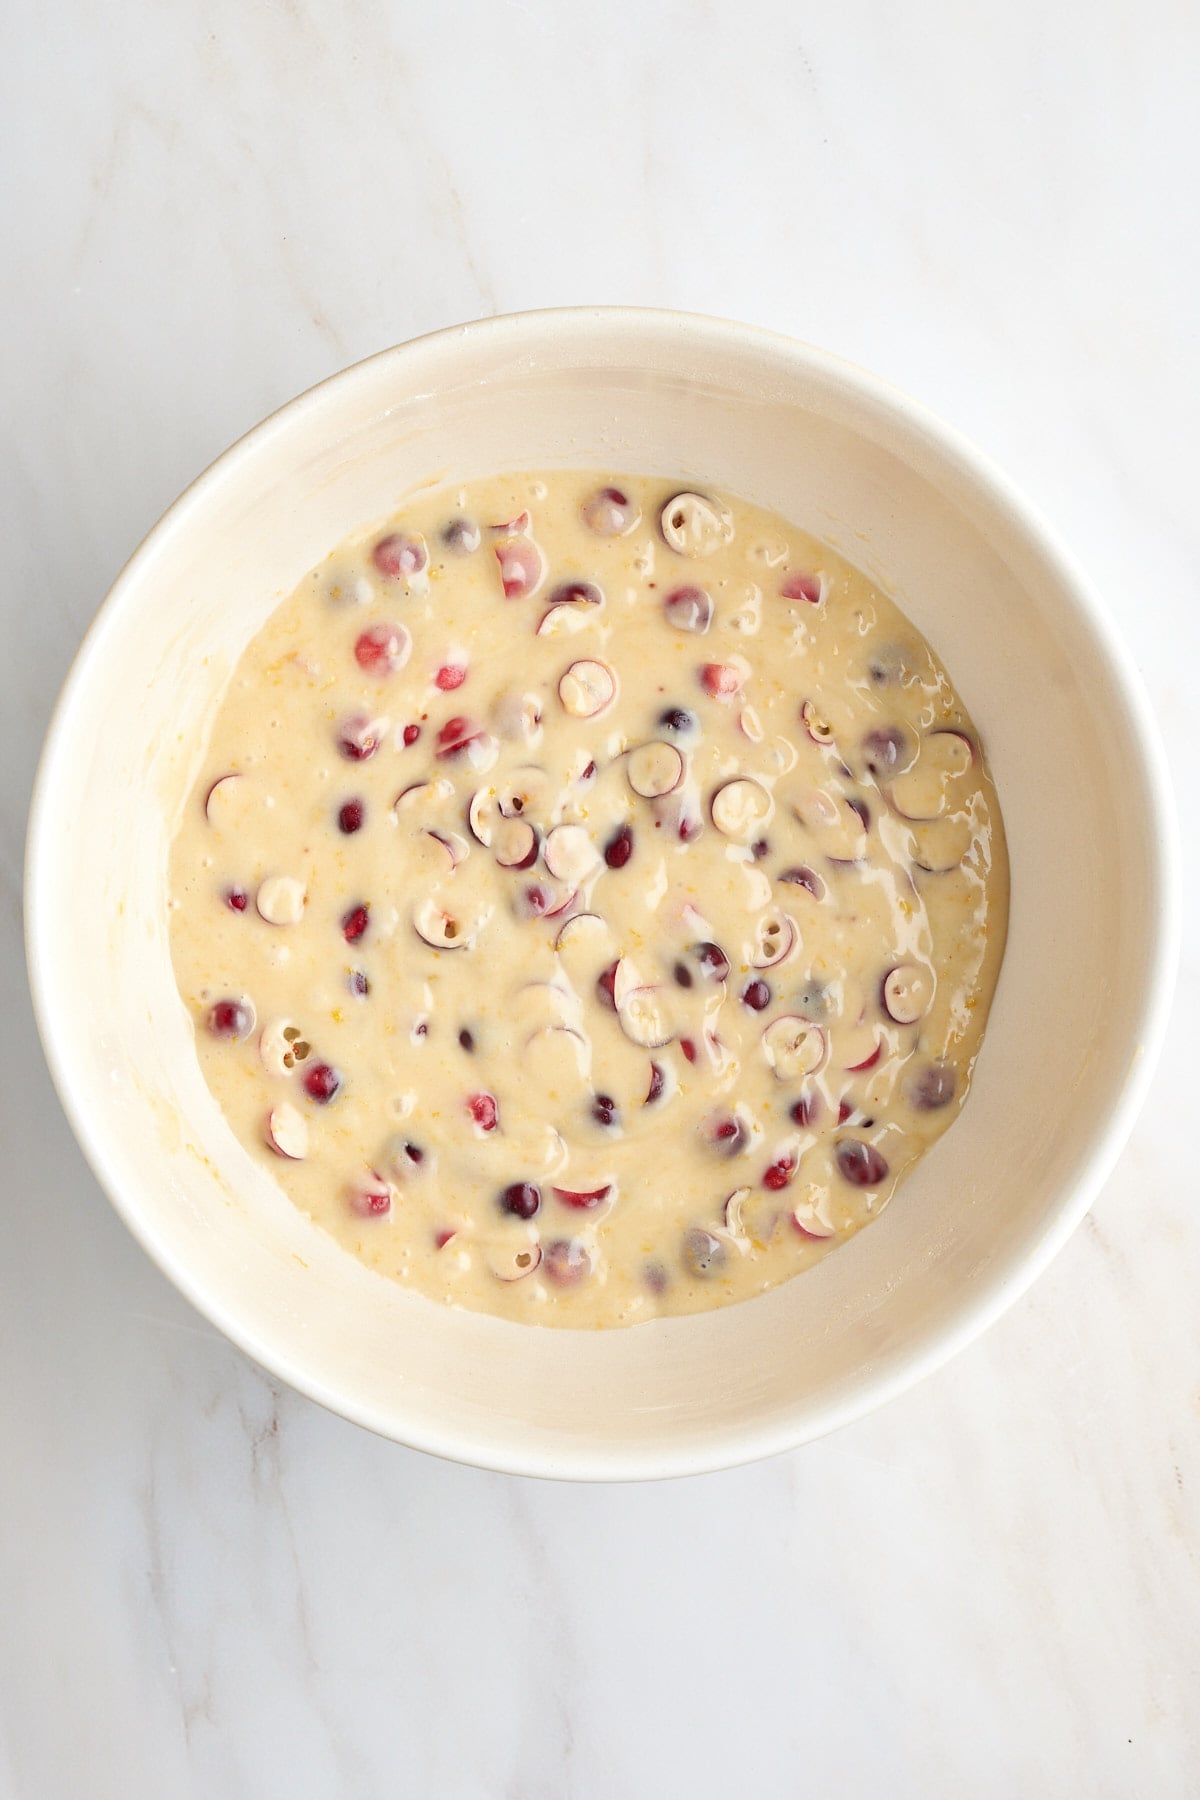 Bowl of cake batter with fresh cranberries mixed in.